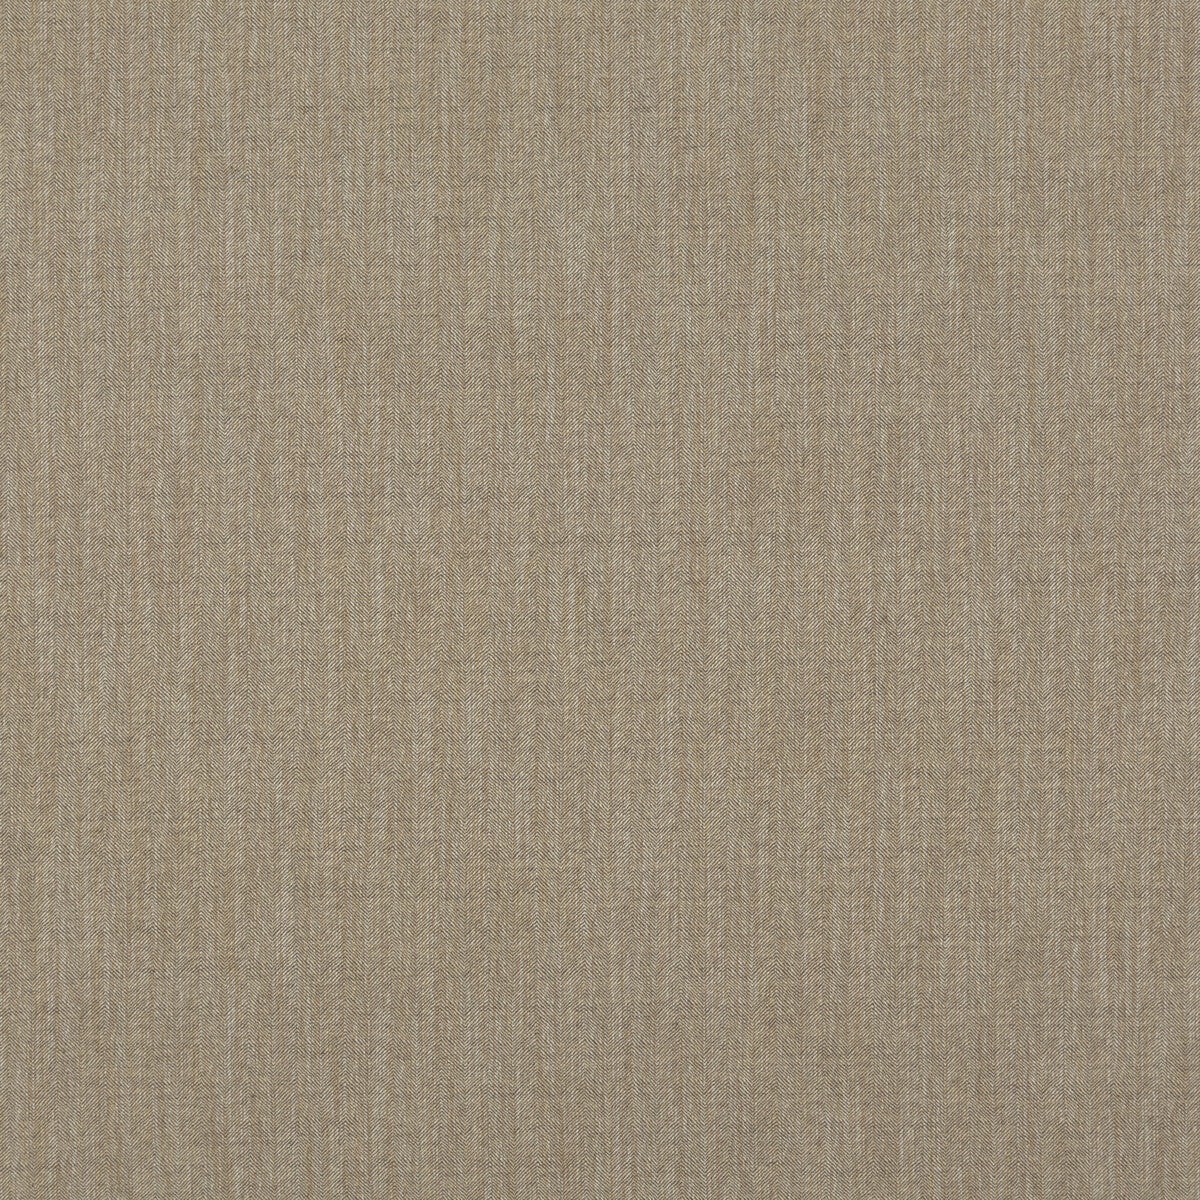 Canyon fabric in bronze color - pattern BF10680.850.0 - by G P &amp; J Baker in the Essential Colours collection